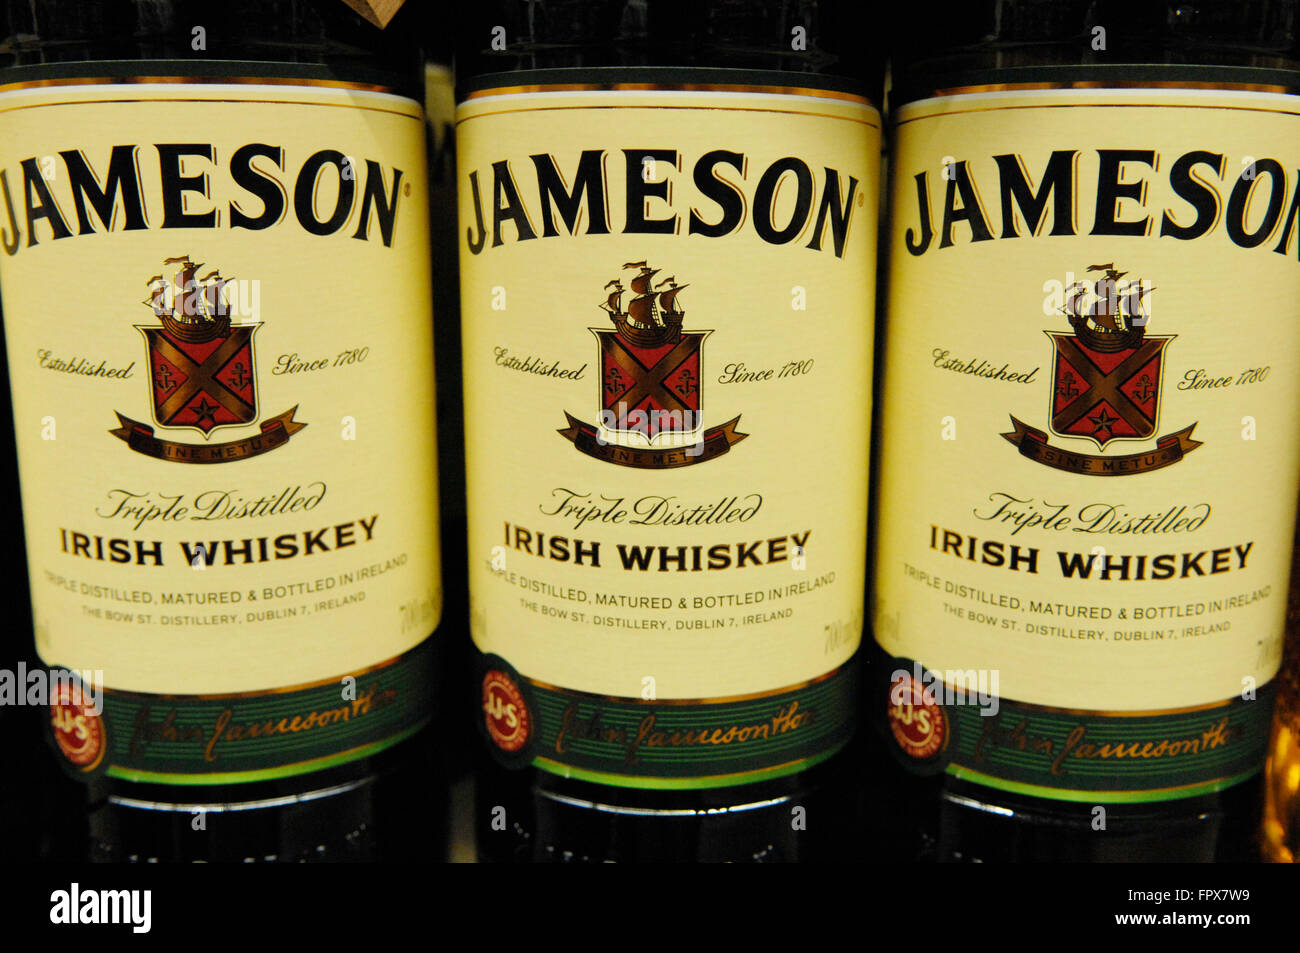 Jameson Irish Whiskey produced by Irish Distillers (Pernod Ricard) on sale in a  Carrefour supermarket. Stock Photo